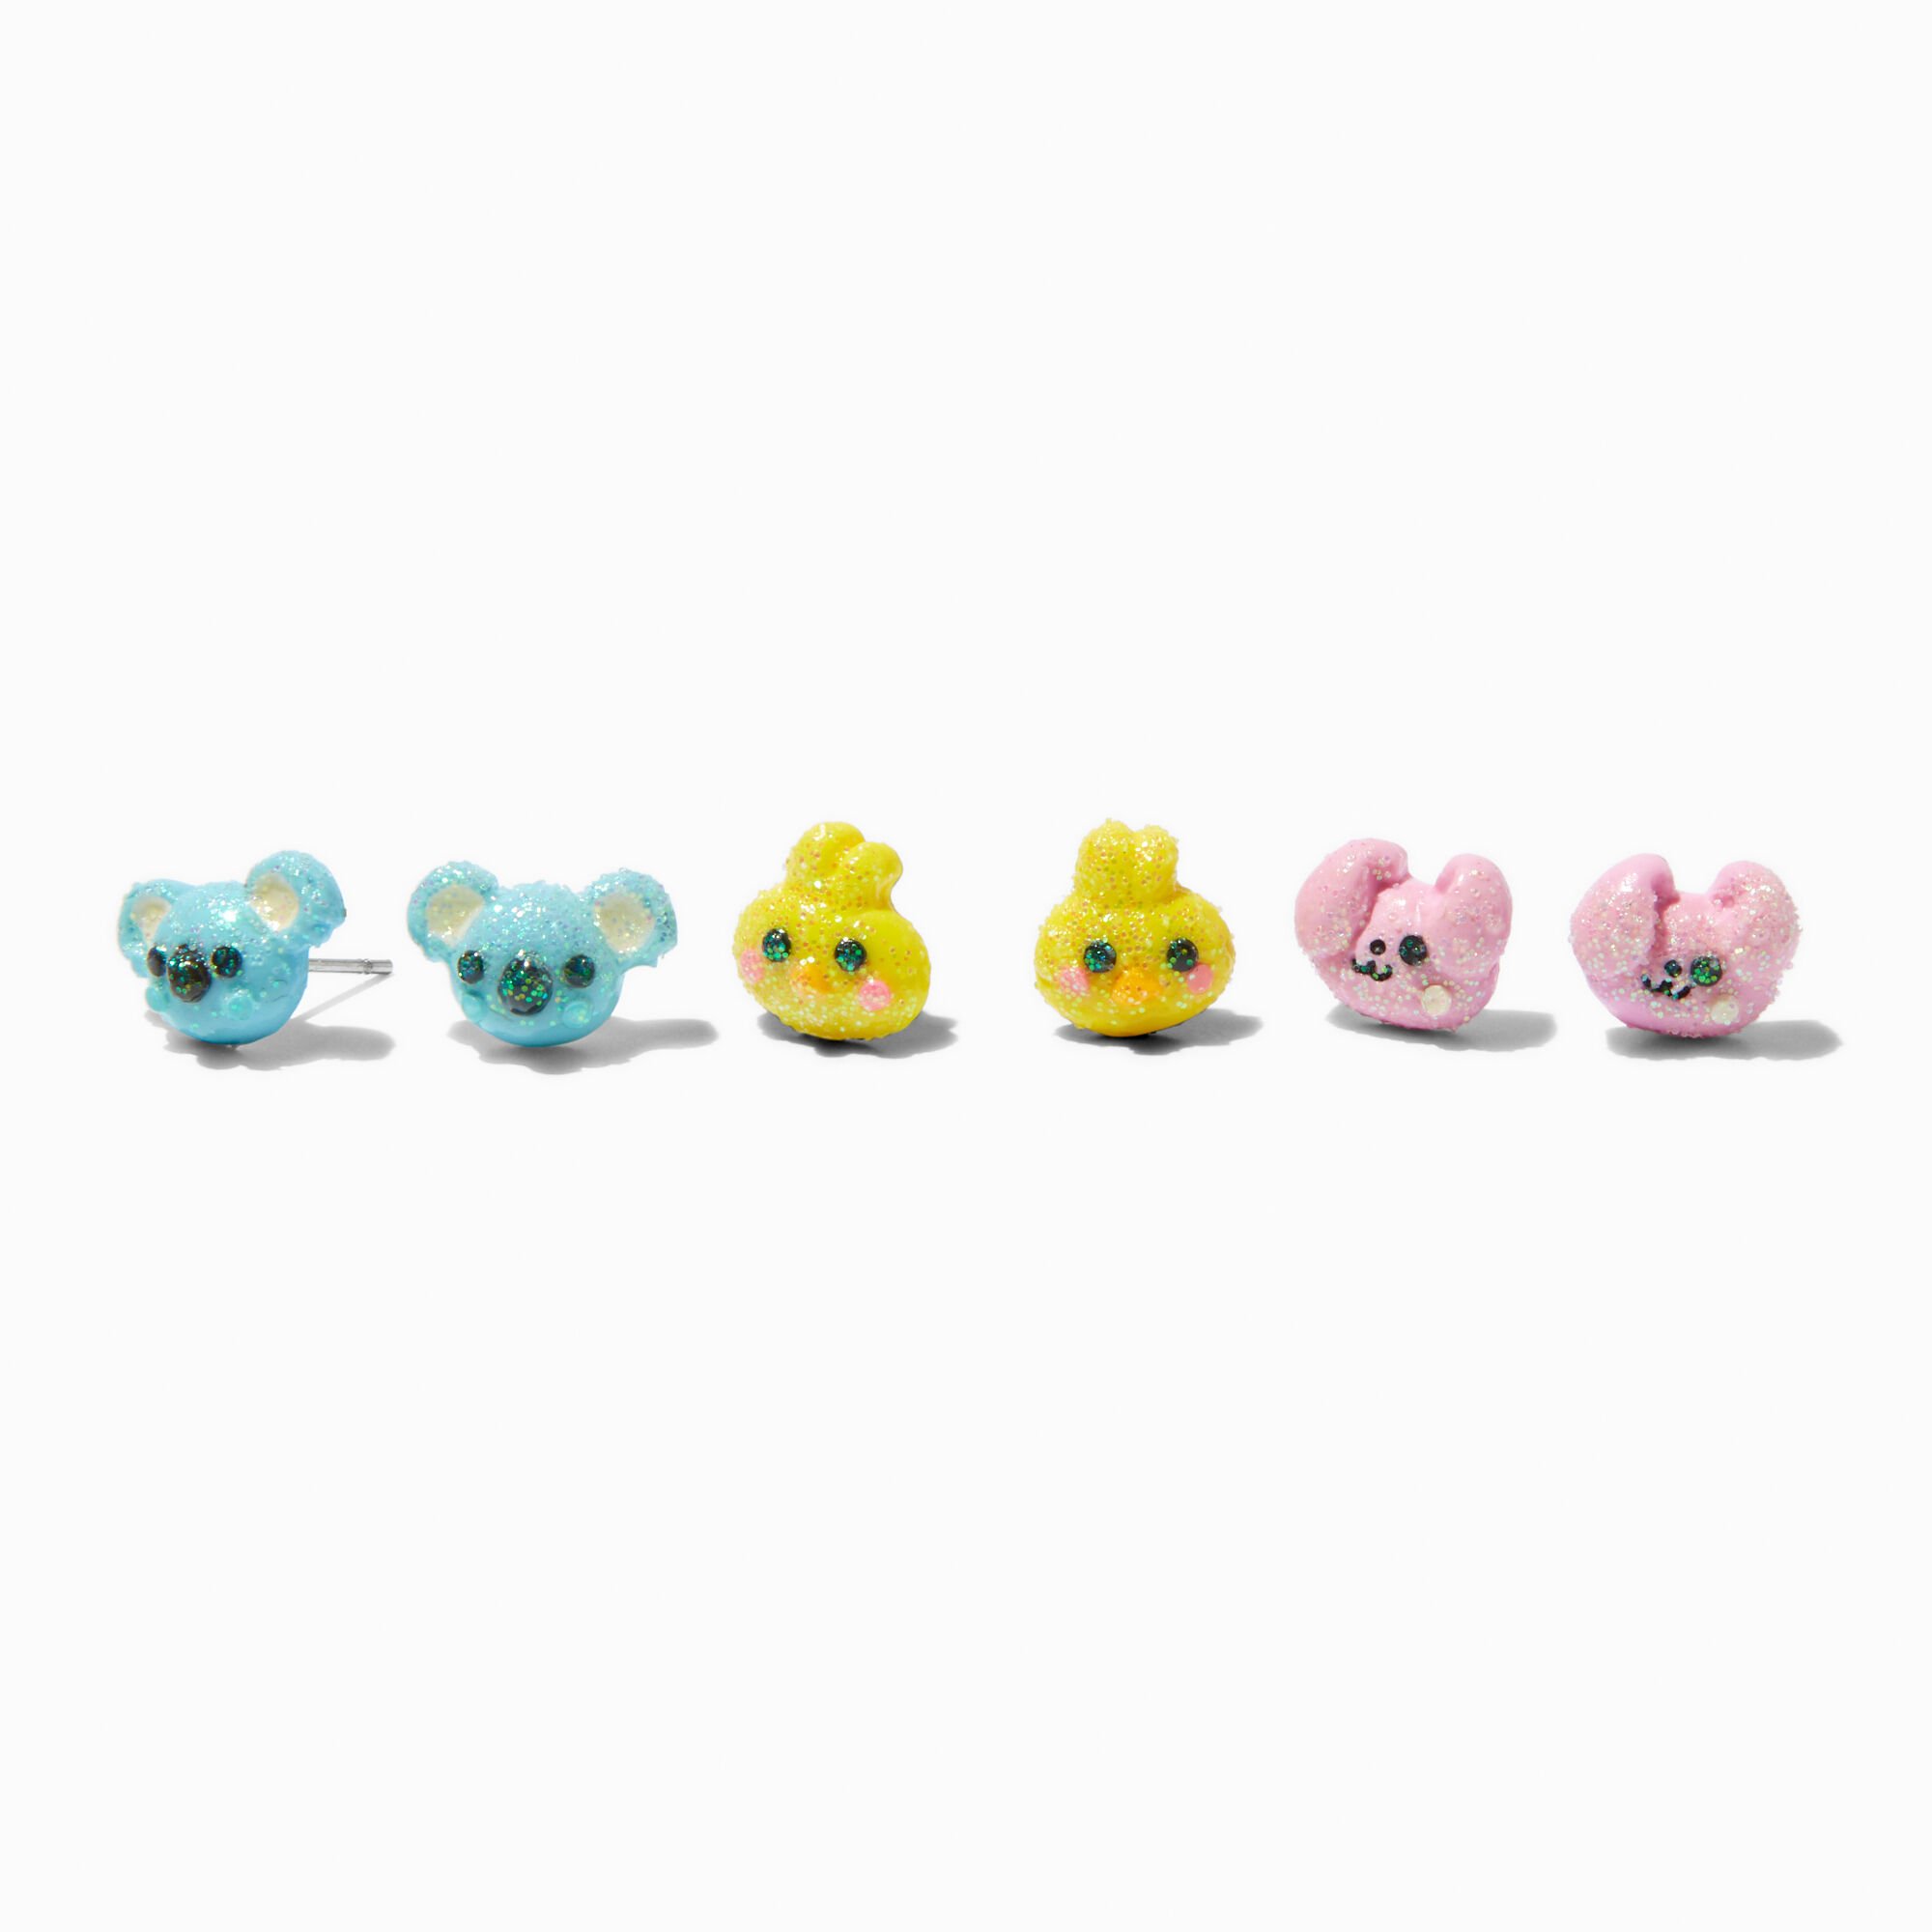 View Claires Glitter Critter Fimo Clay Stud Earrings 3 Pack information